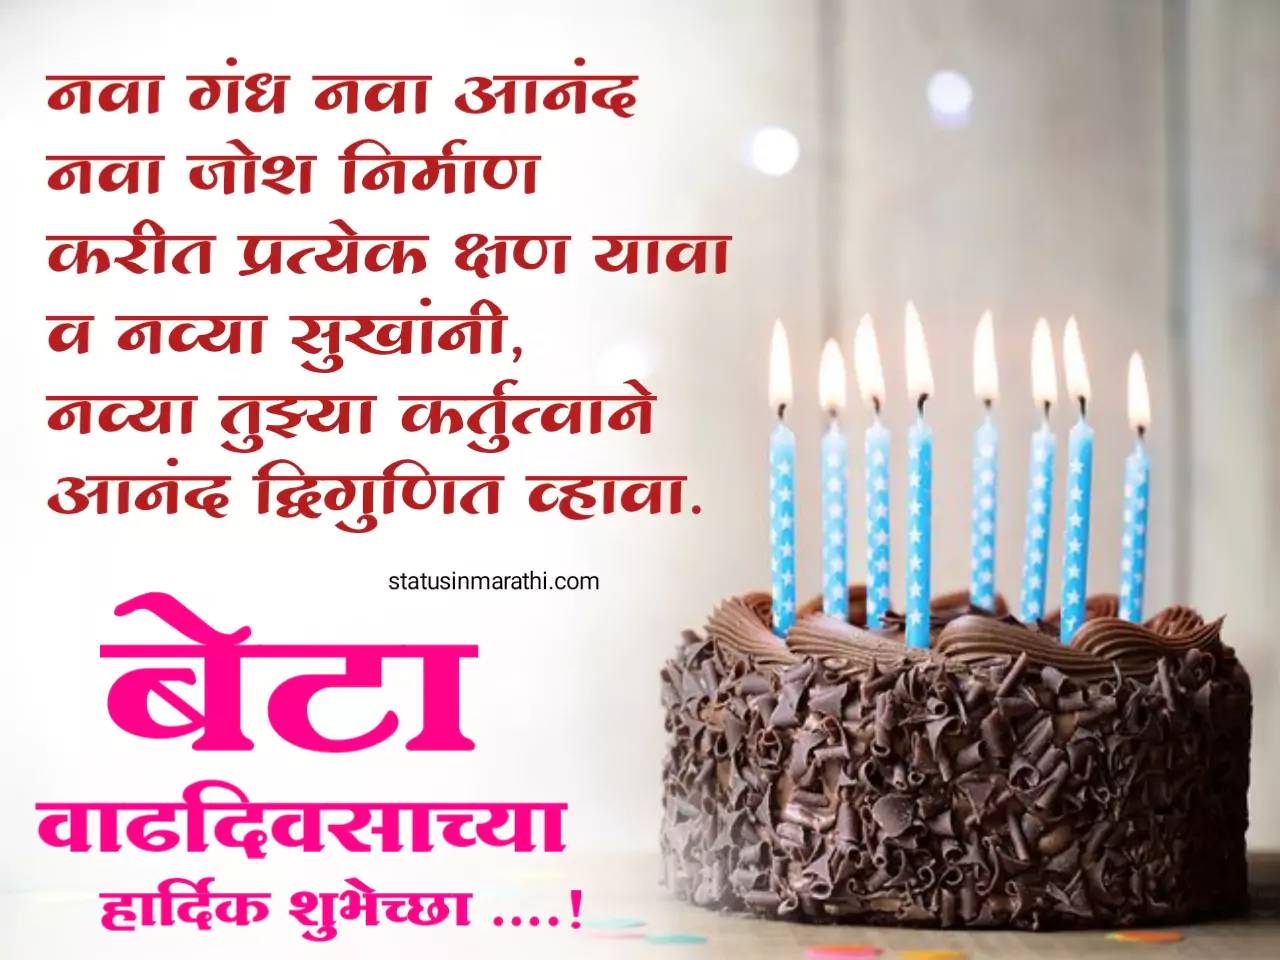 Happy Birthday images for son in marathi